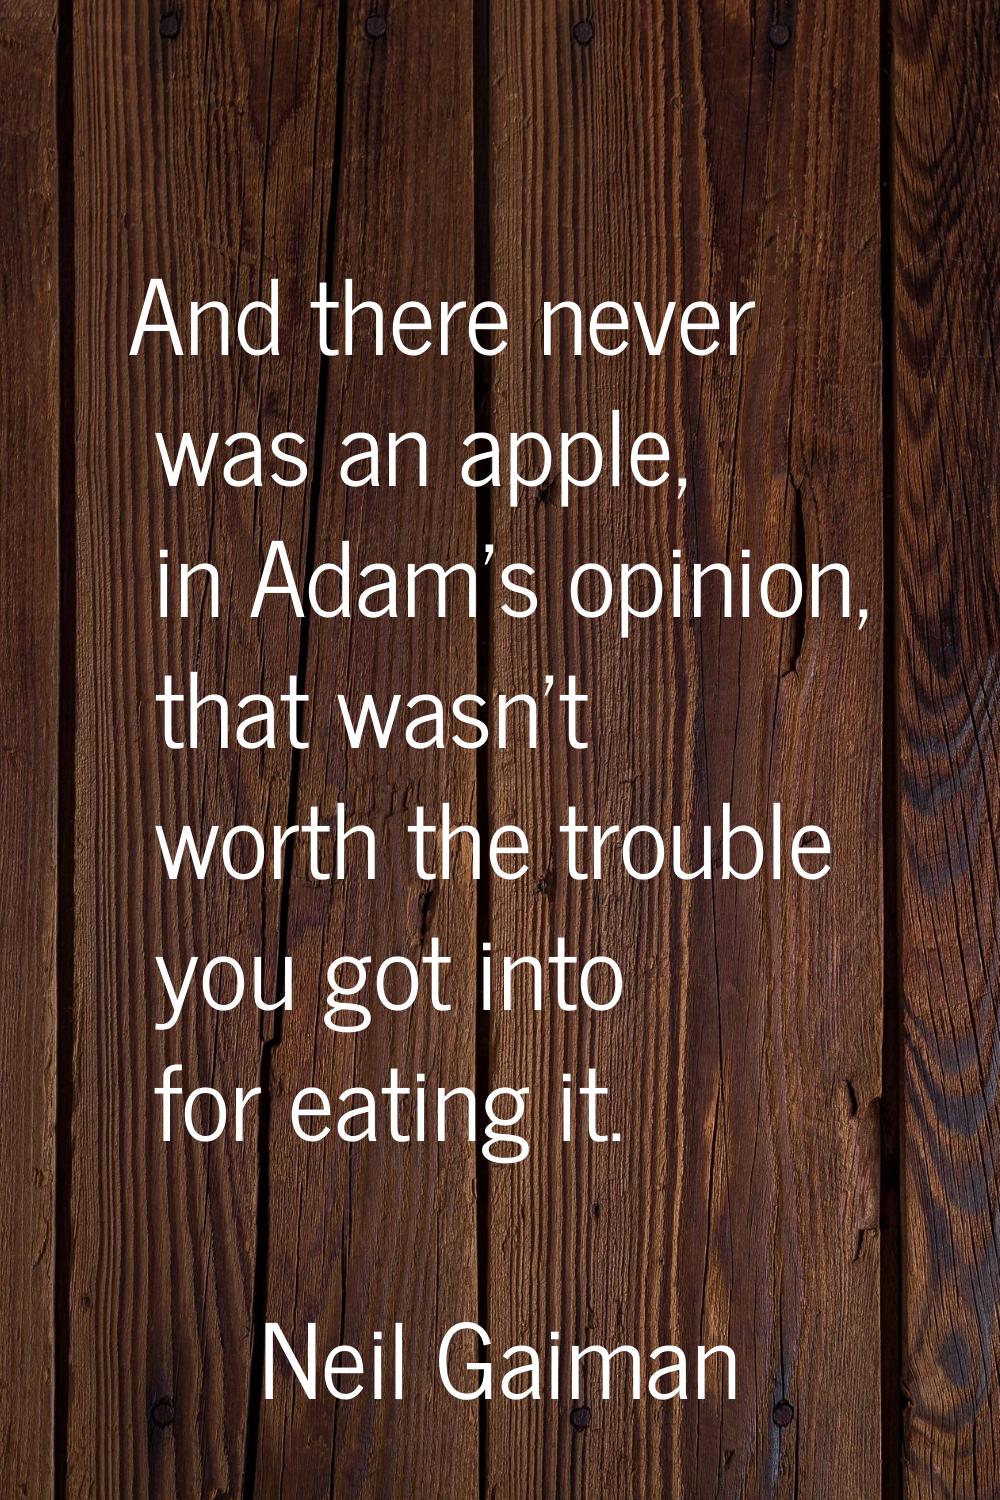 And there never was an apple, in Adam's opinion, that wasn't worth the trouble you got into for eat